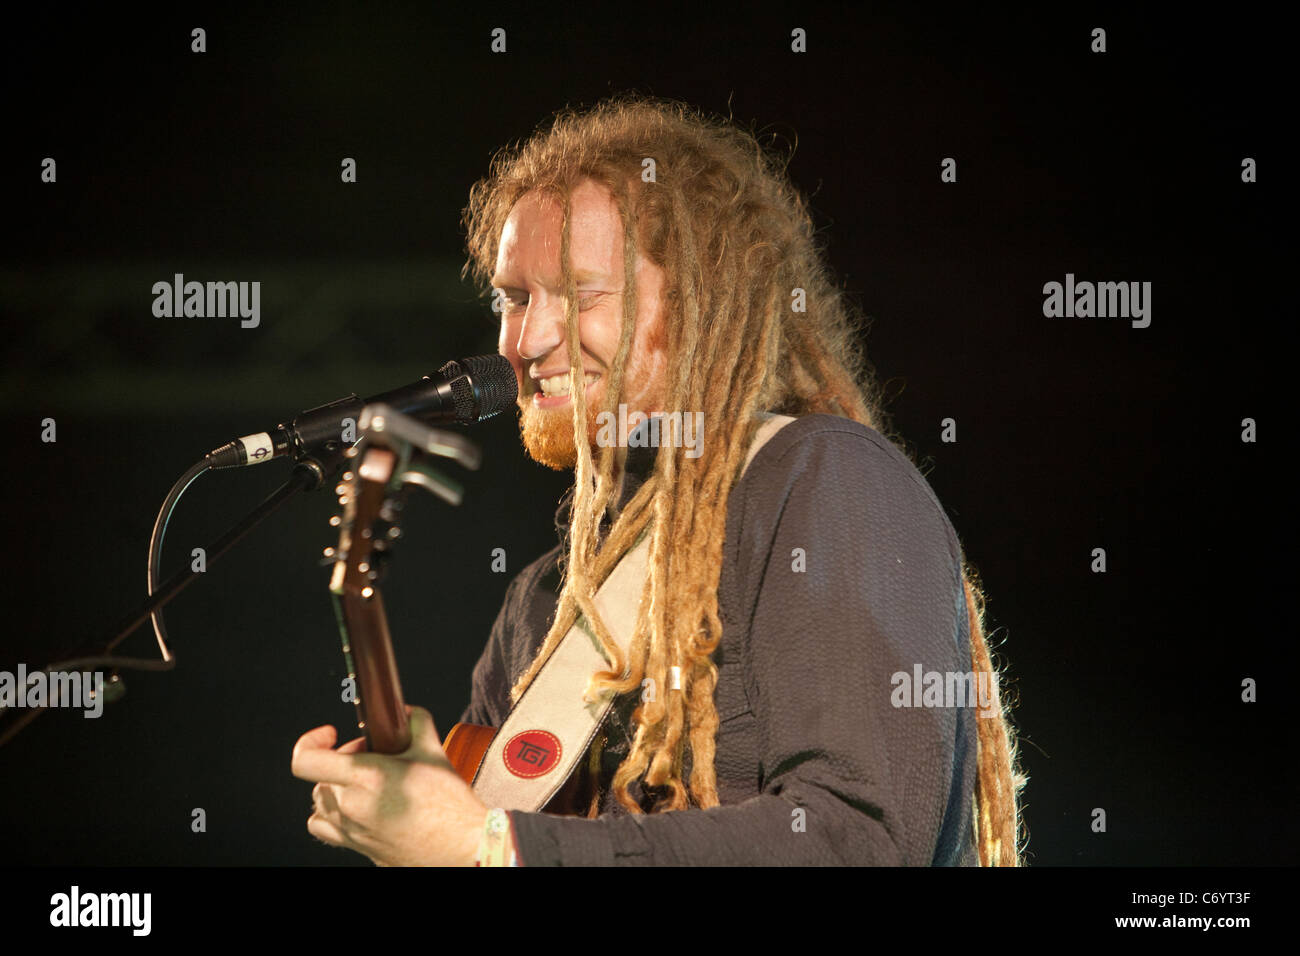 Newton Faulkner performs the Massive Attack cover 'Tear Drop', at Weyfest 2011, Tilford, Surrey, England Stock Photo